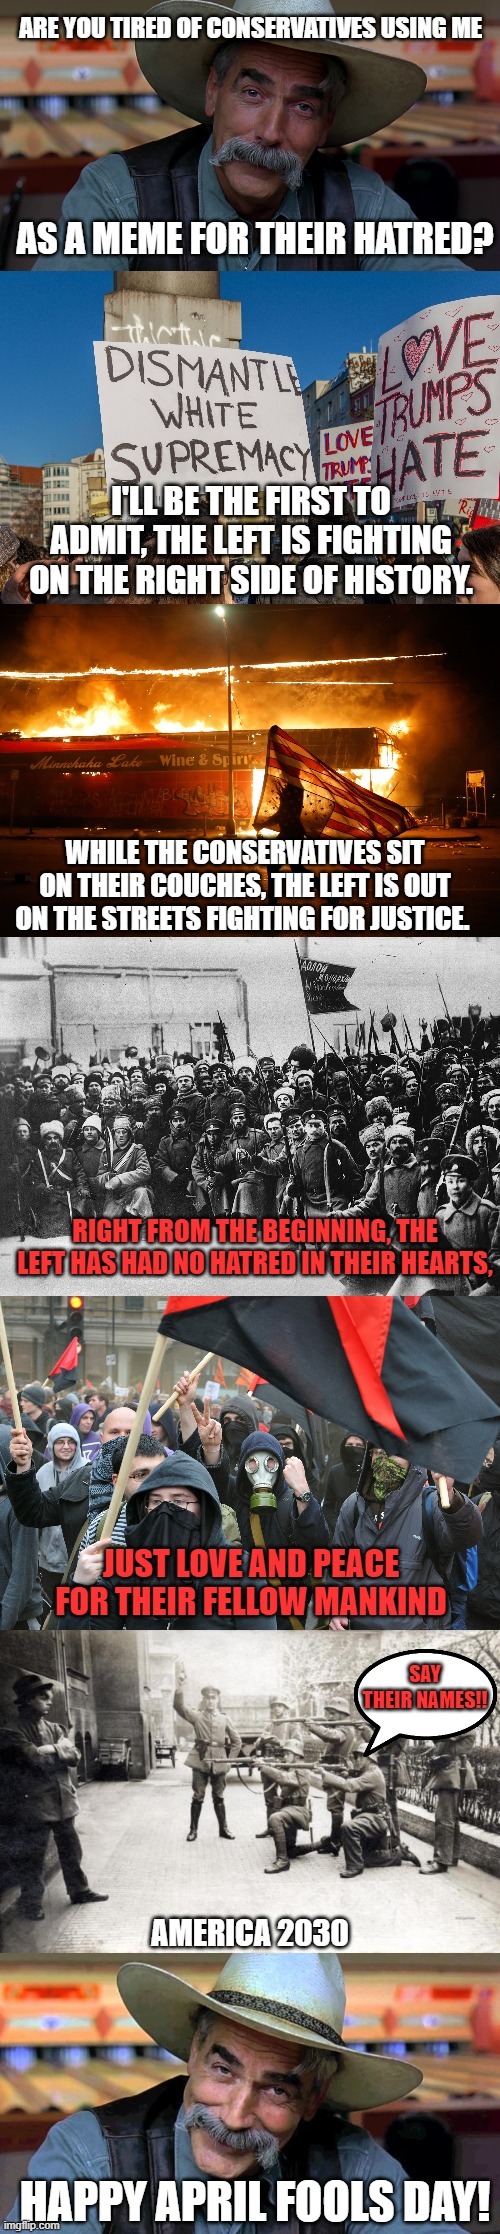 The Left is Right | image tagged in political meme,political correctness,political humor | made w/ Imgflip meme maker